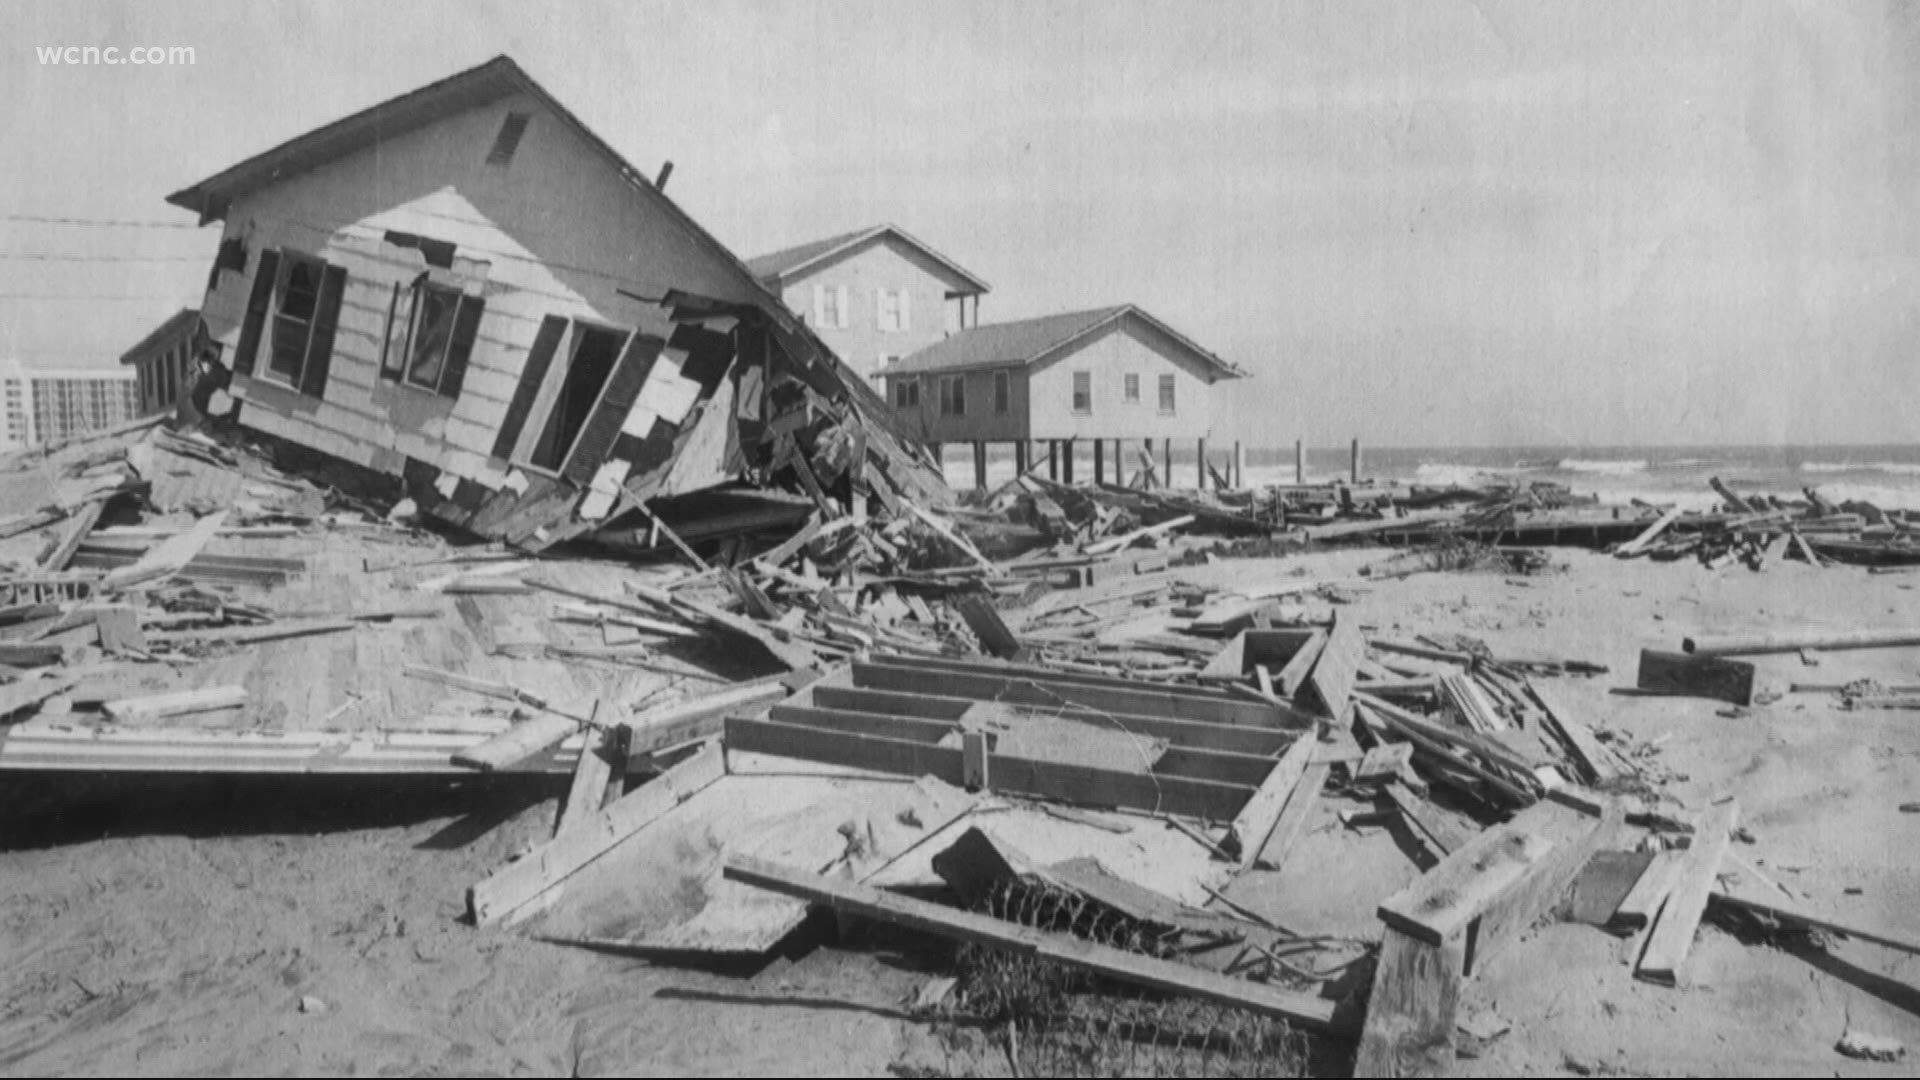 The worst hurricanes observed in Carolina history tend to occur in September and October.